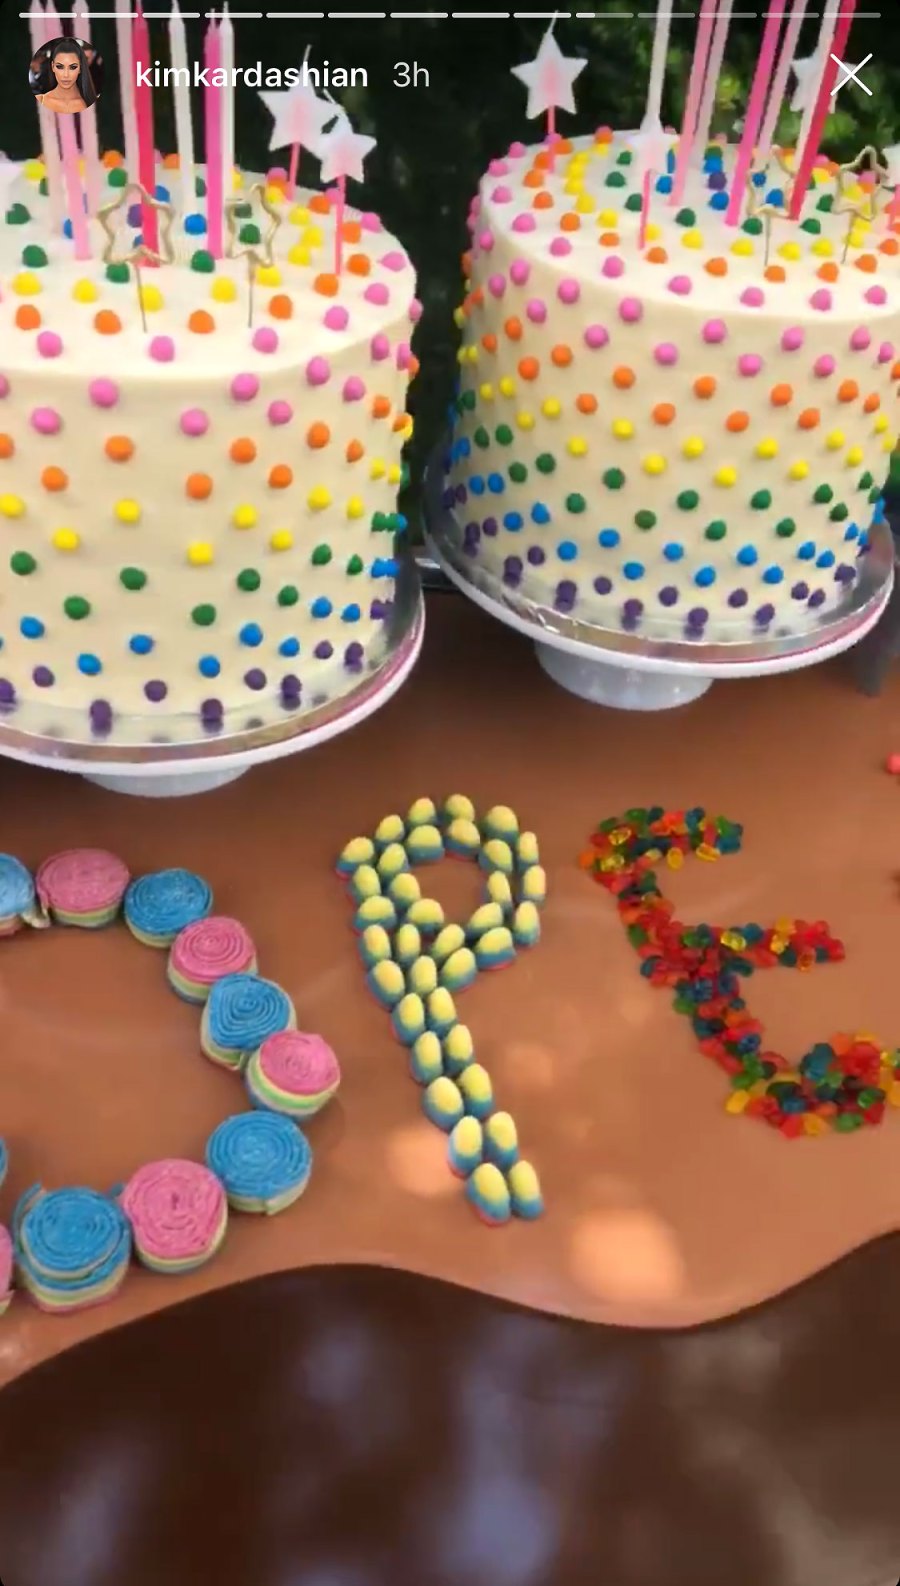 Colorful Birthday Cakes and Candy